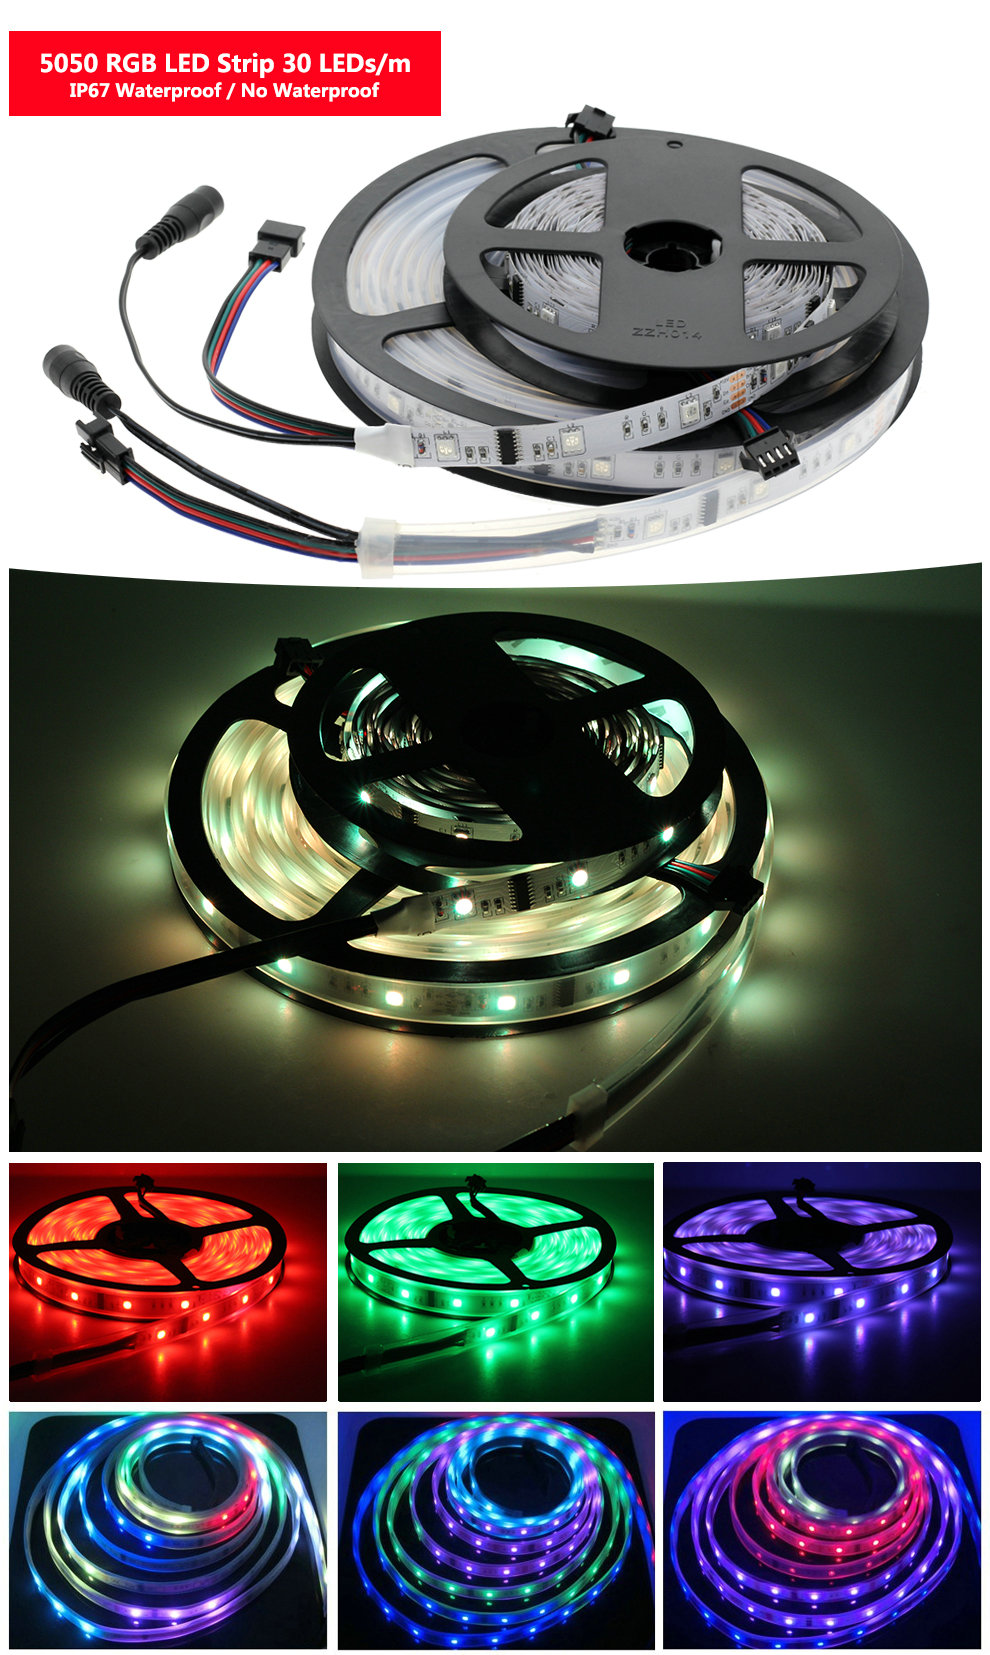 FEICAN 6803 IC SMD 5050 RGB Dream Magic Color LED Strip DC12V 30LED/M IP67 waterproof Non Waterproof Flexible Strip Tape 5M